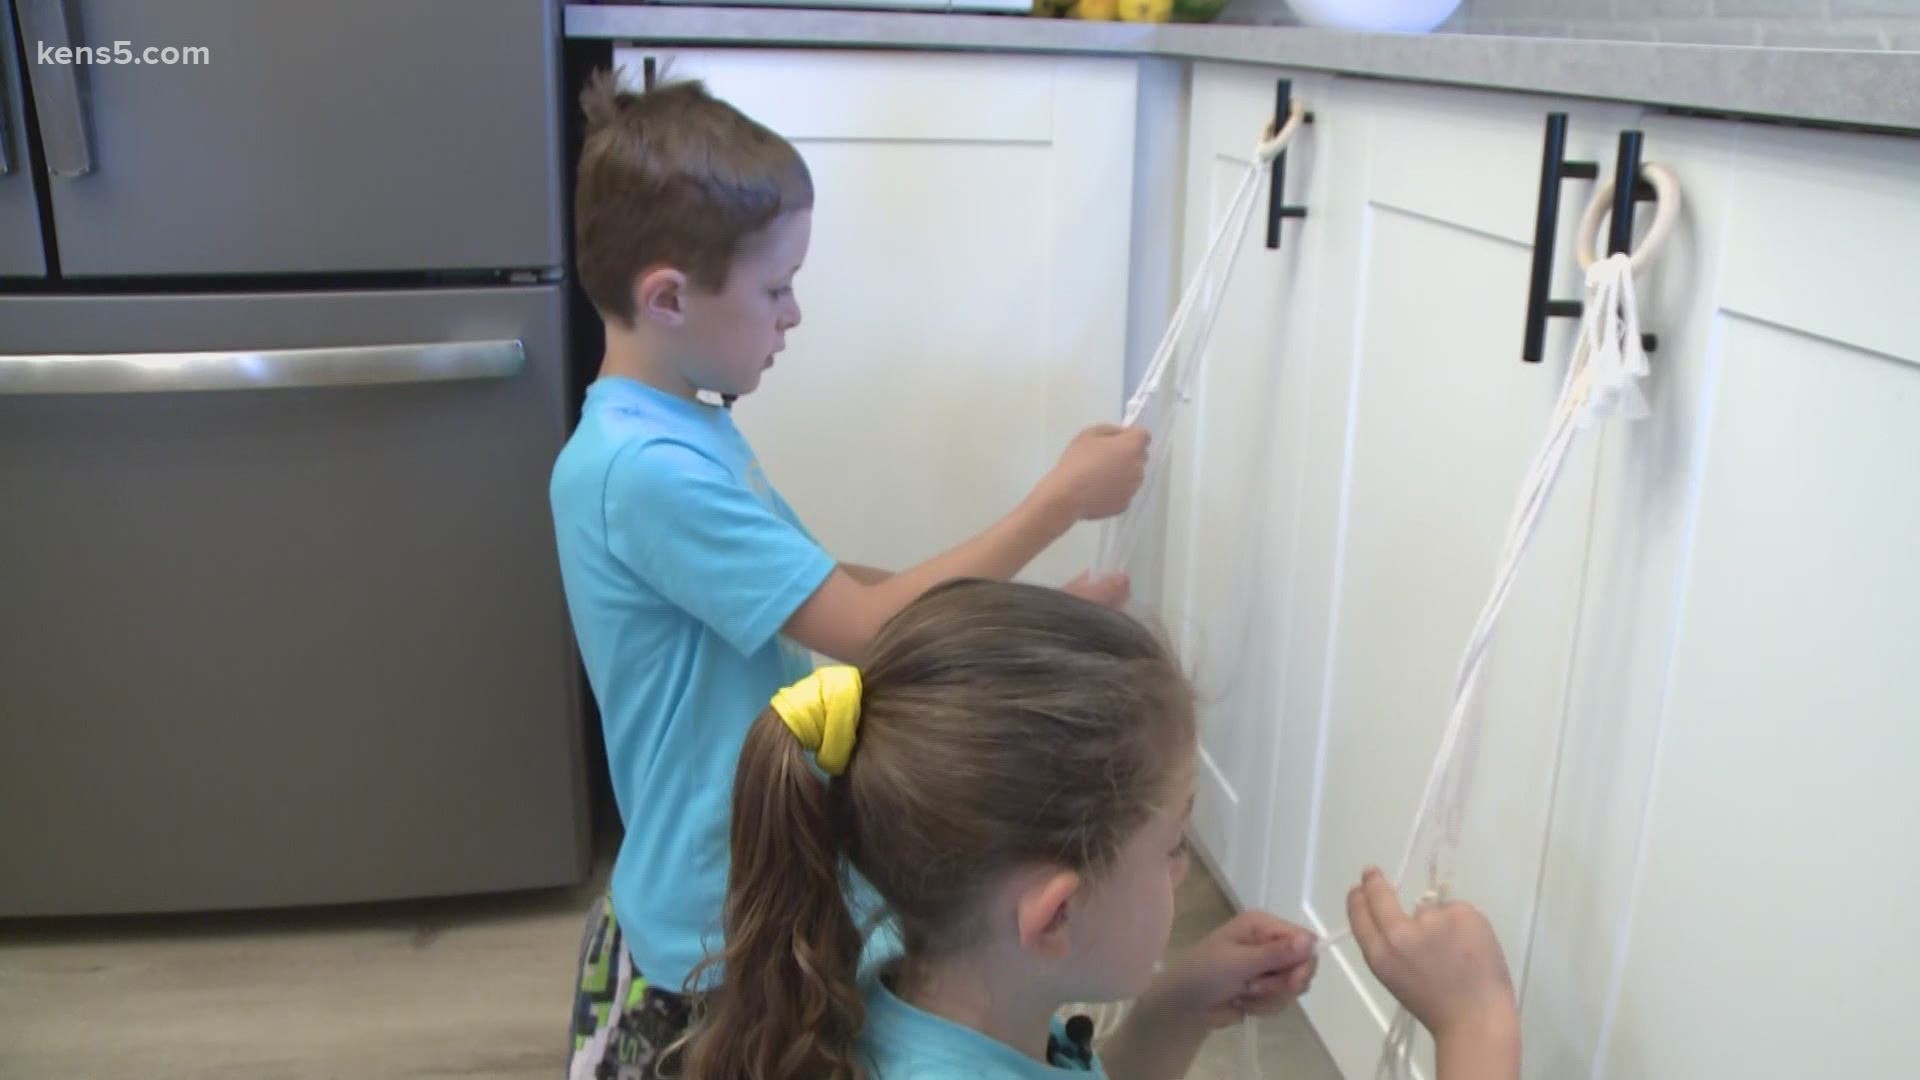 These two siblings use teamwork and their crafty skills to bring a smile to the faces of others.